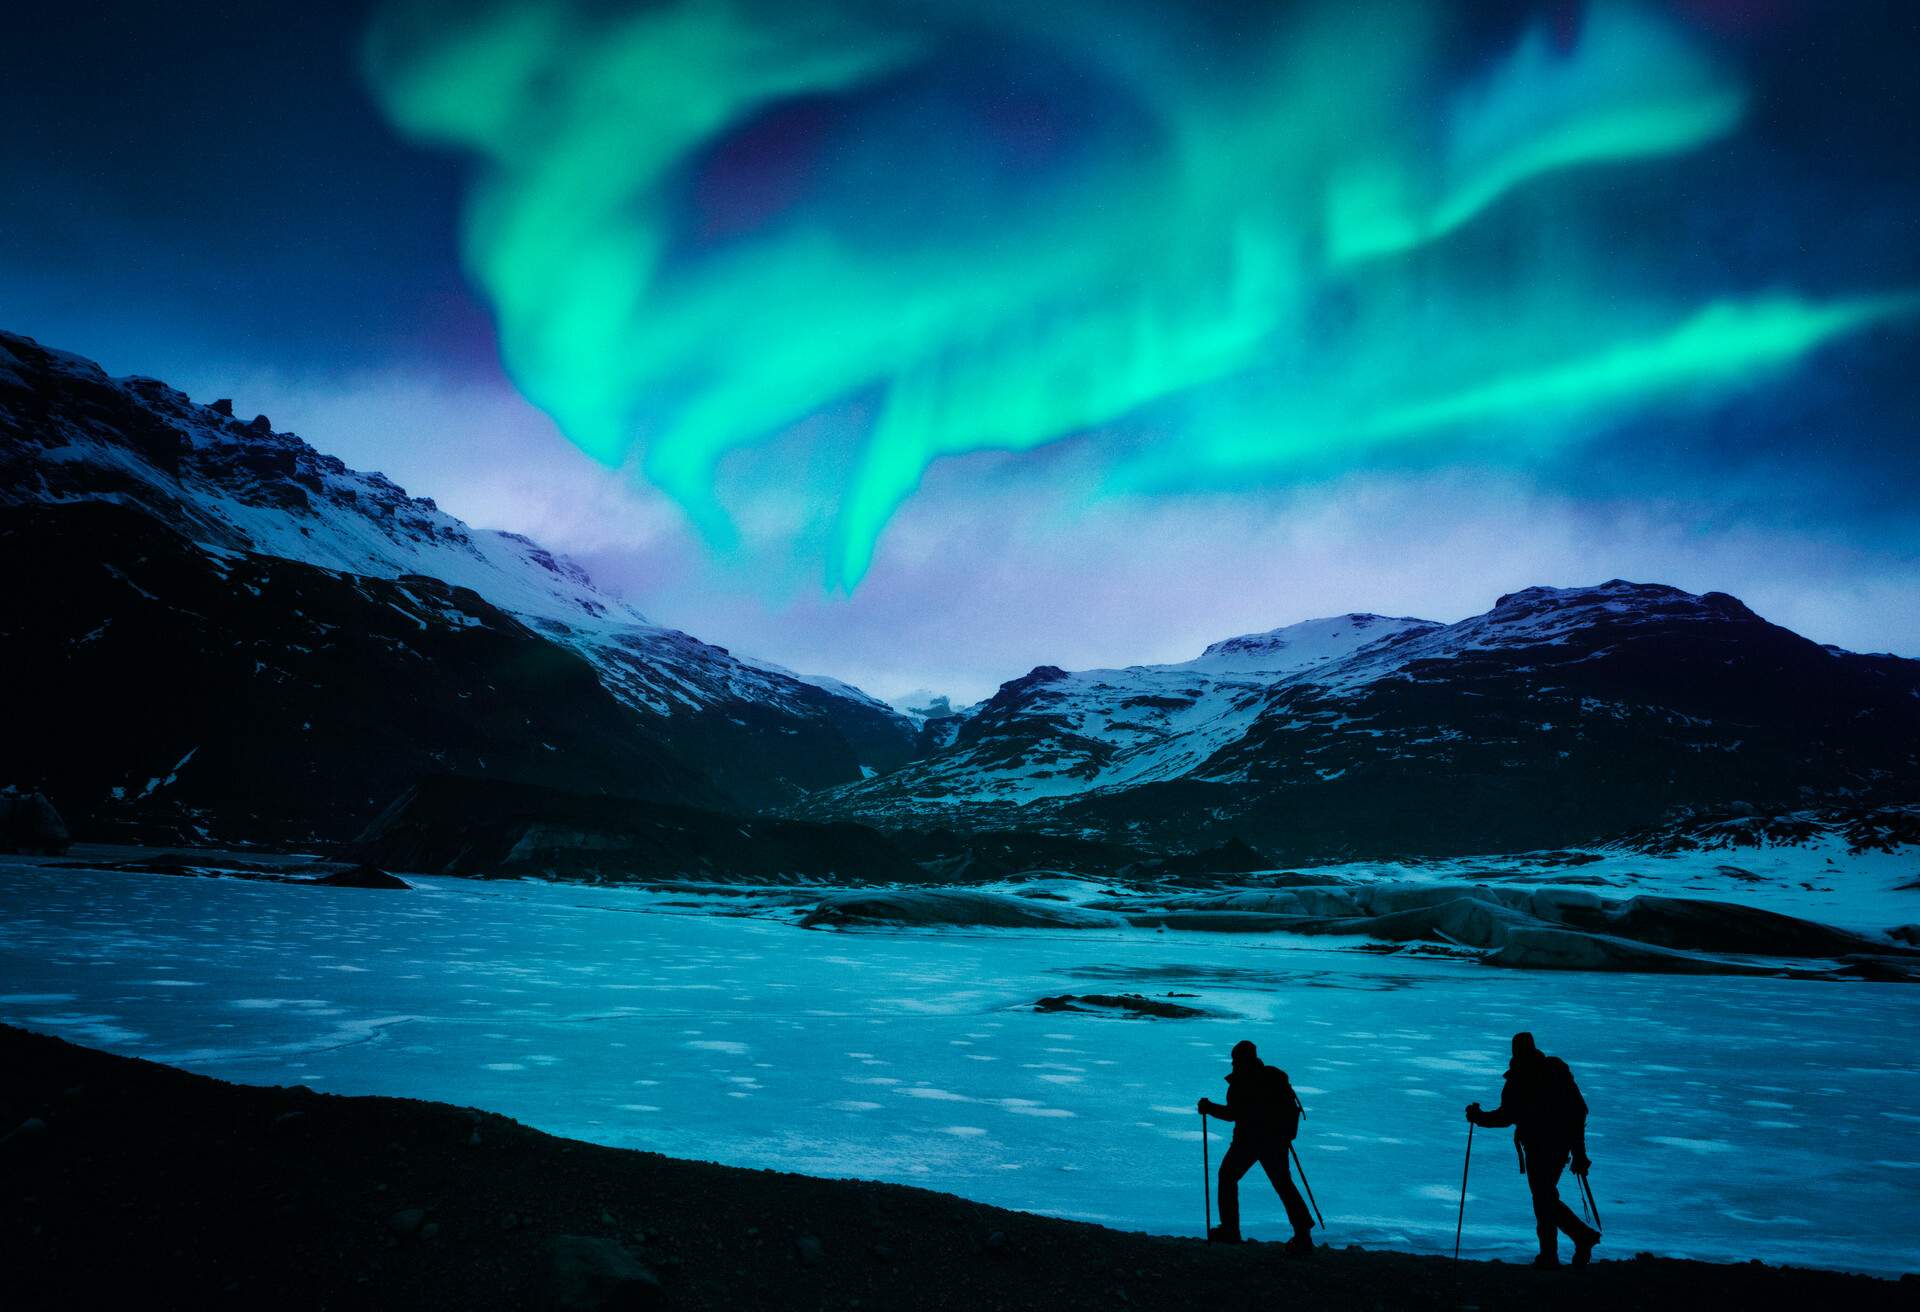 THEME_HIKERS_HIKING_NORTHERN-LIGHTS-GettyImages-538653565